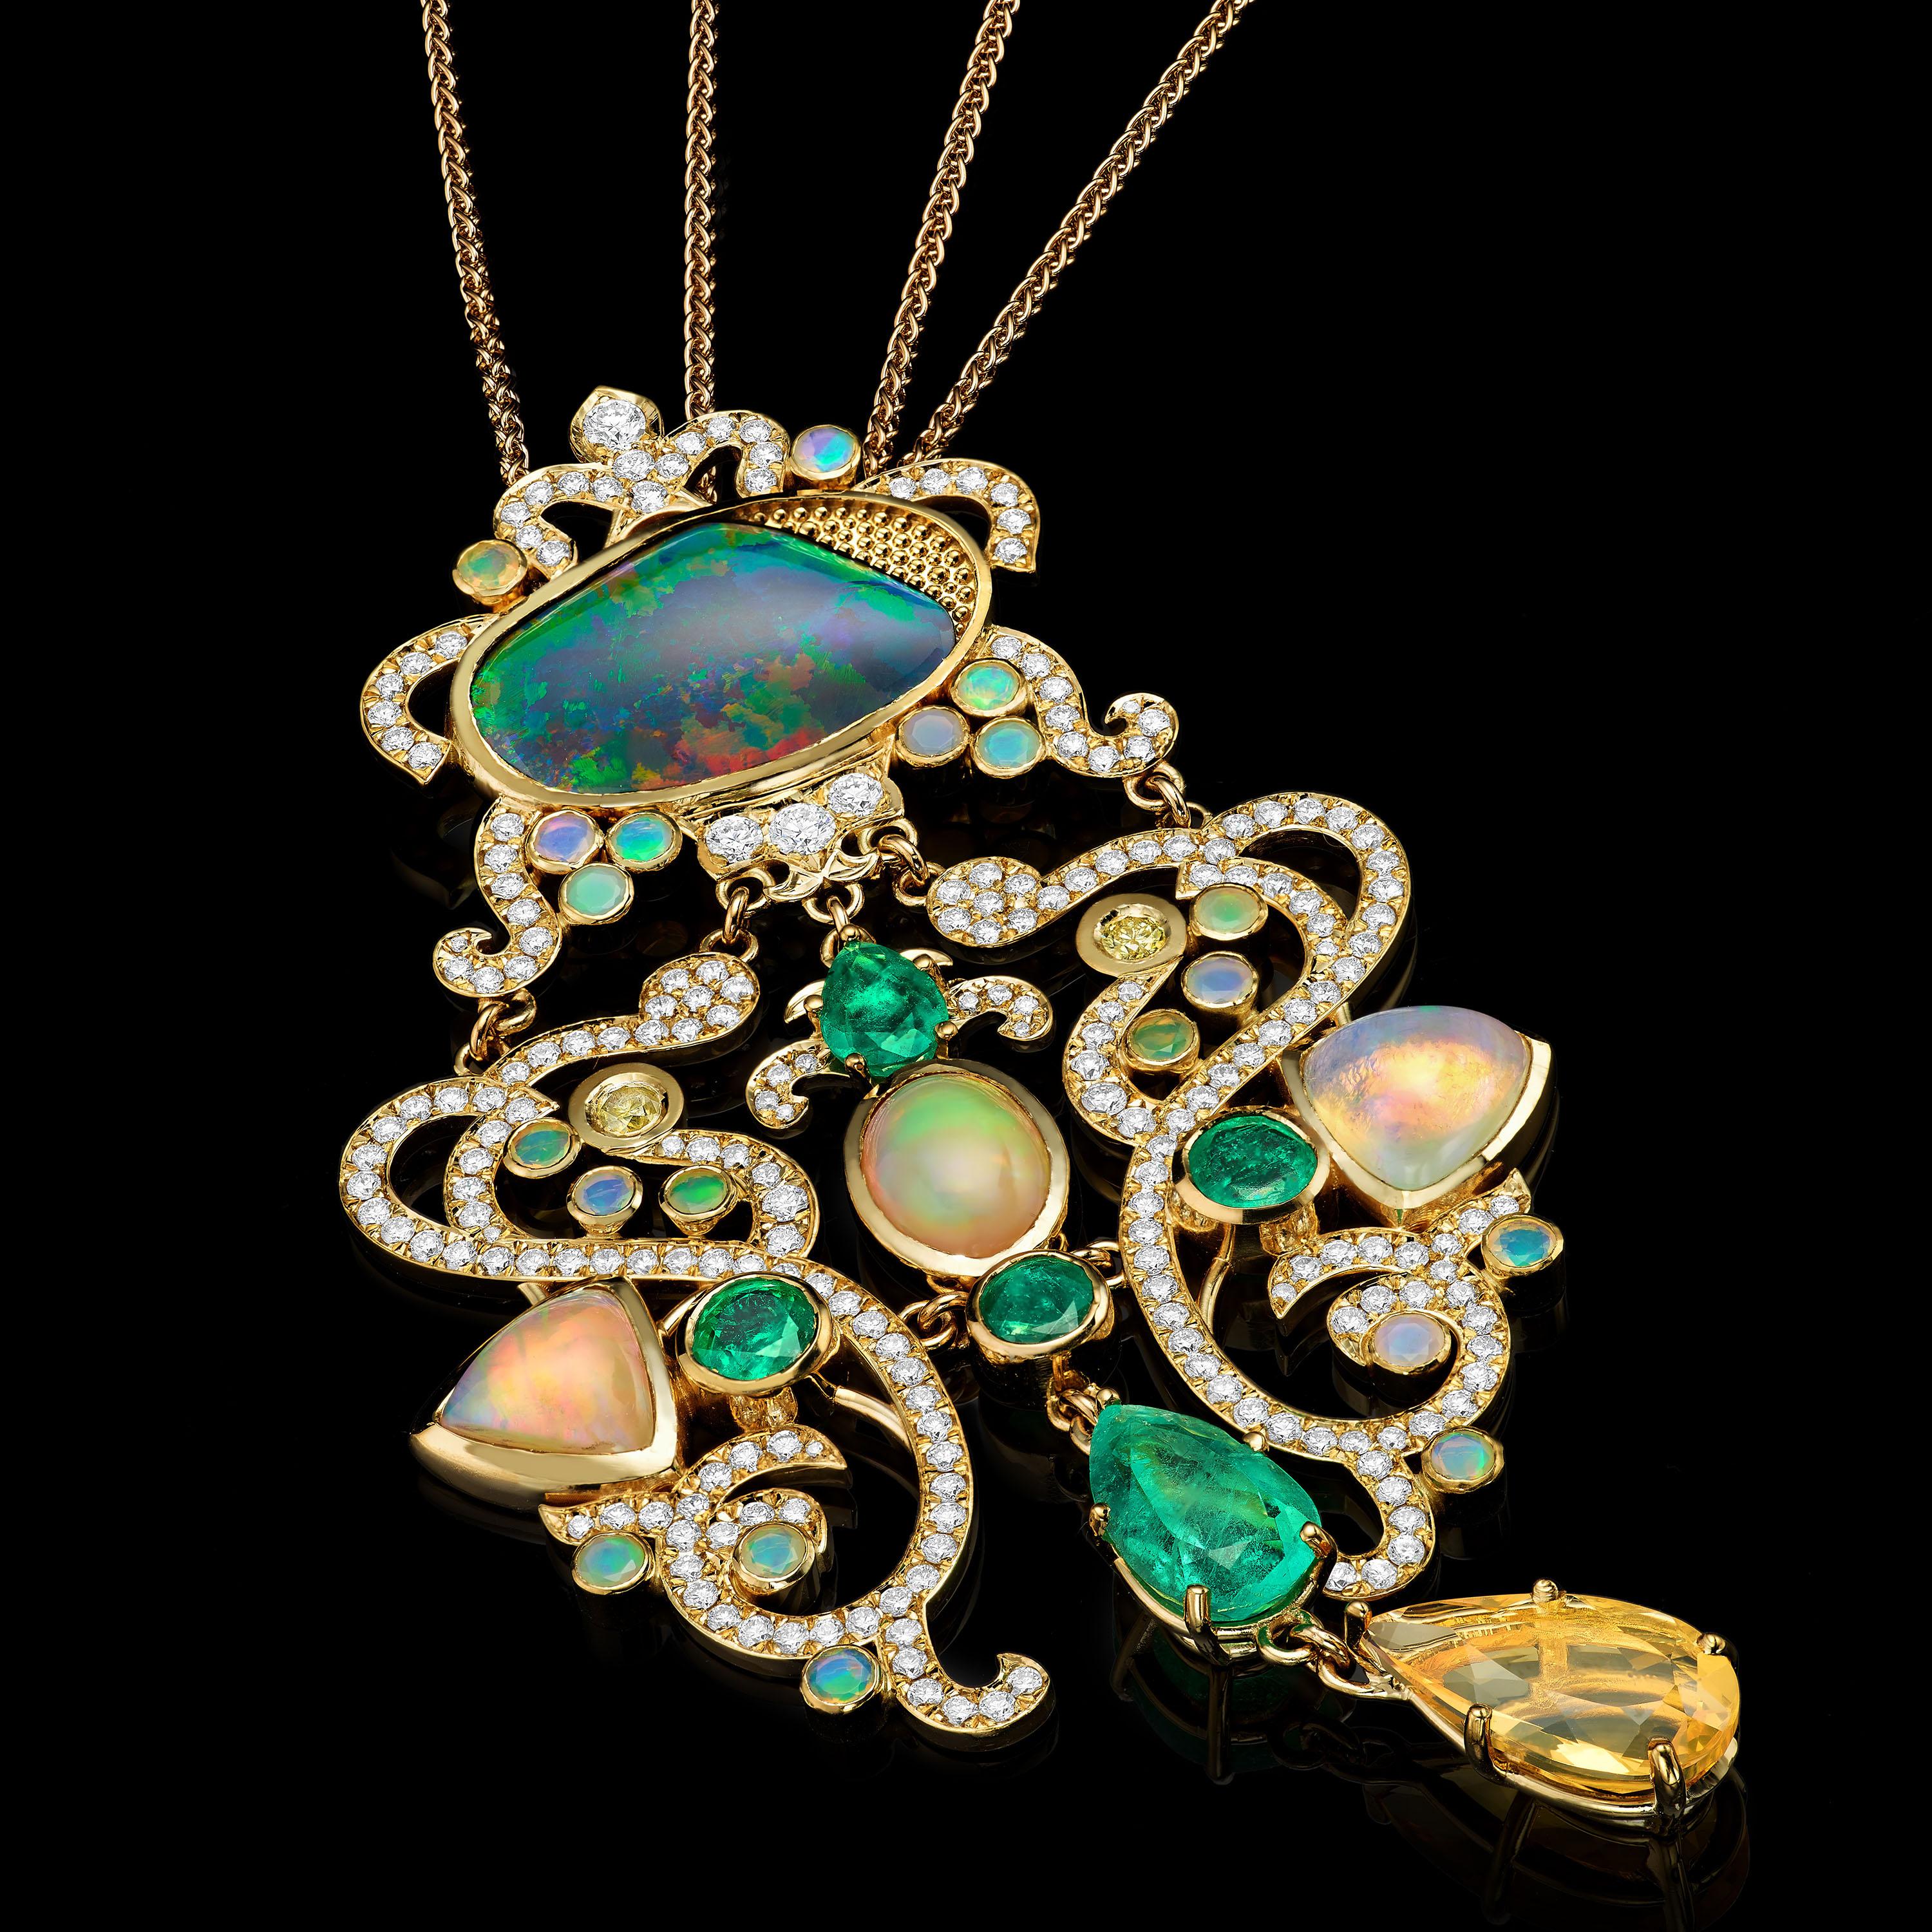 Bifrost pendant in 18K gold set with diamonds (5.0 ctw), emeralds (5.23ctw), and three kinds of opals (Australian, Ethiopian, and Mexican 15ctw). 

Bifrost is an Old Norse term that means a shimmering path to heaven. Often thought to be a reference